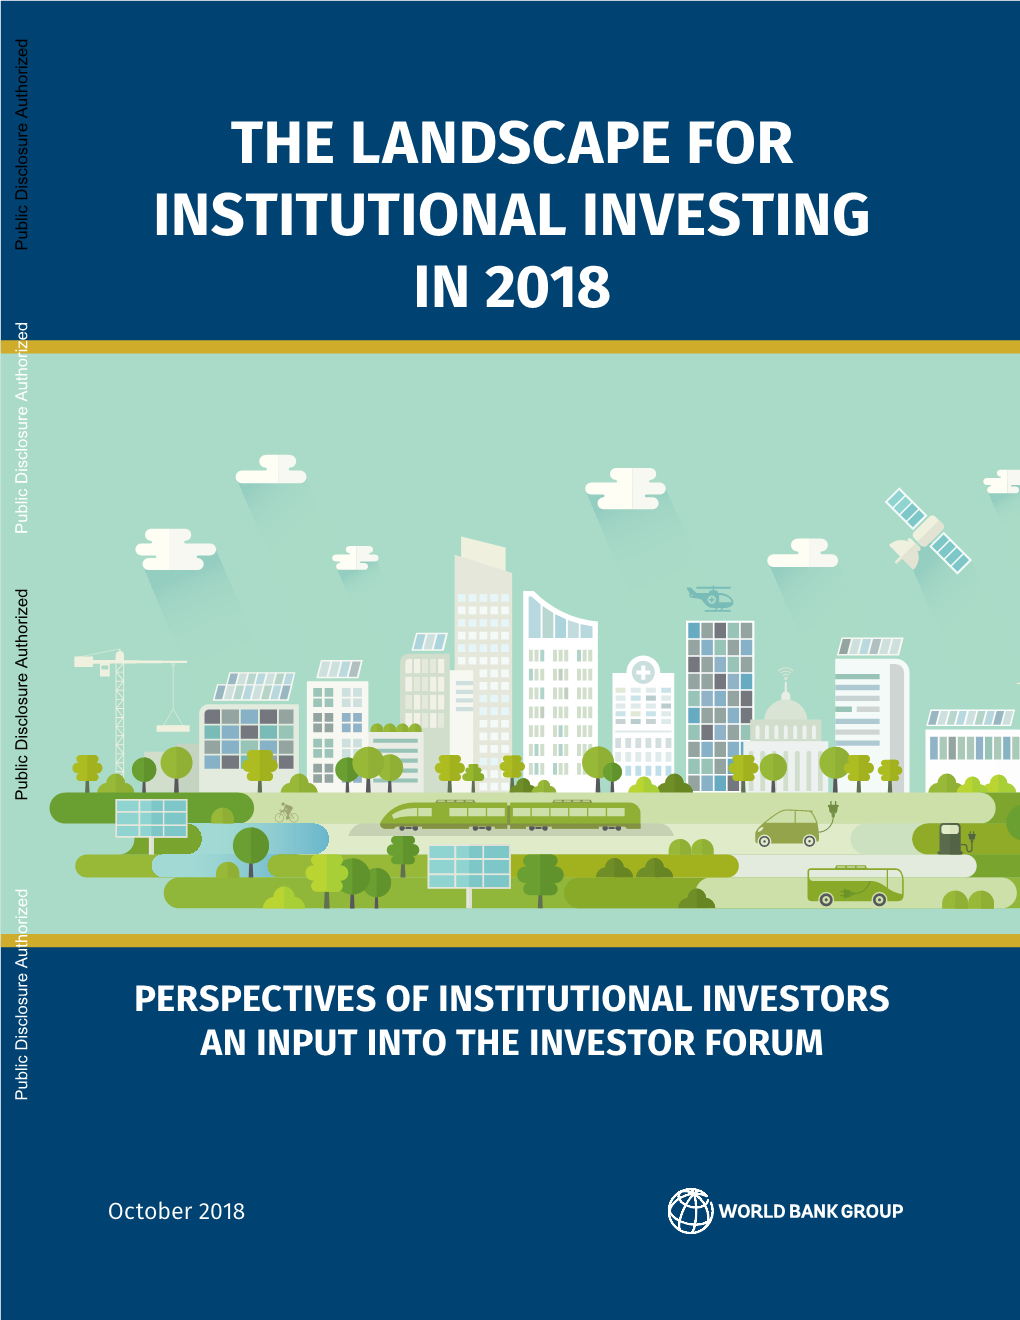 The Landscape for Institutional Investing in 2018